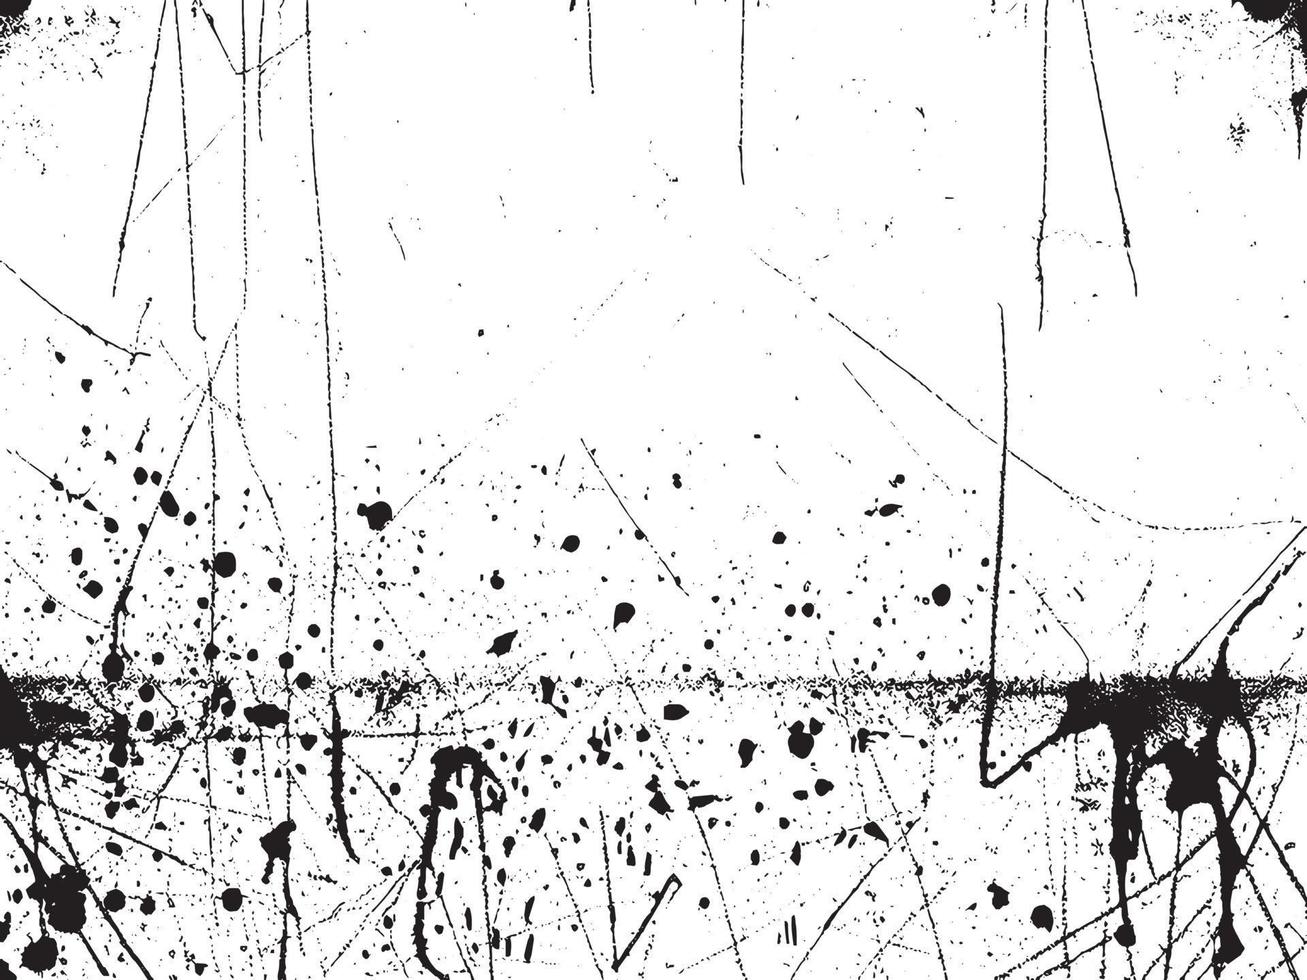 Vintage Grunge Concrete Wall Texture with Distressed Elements of Chalk, Stains, Scratches, and Noise in Black and White. Vector EPS 10